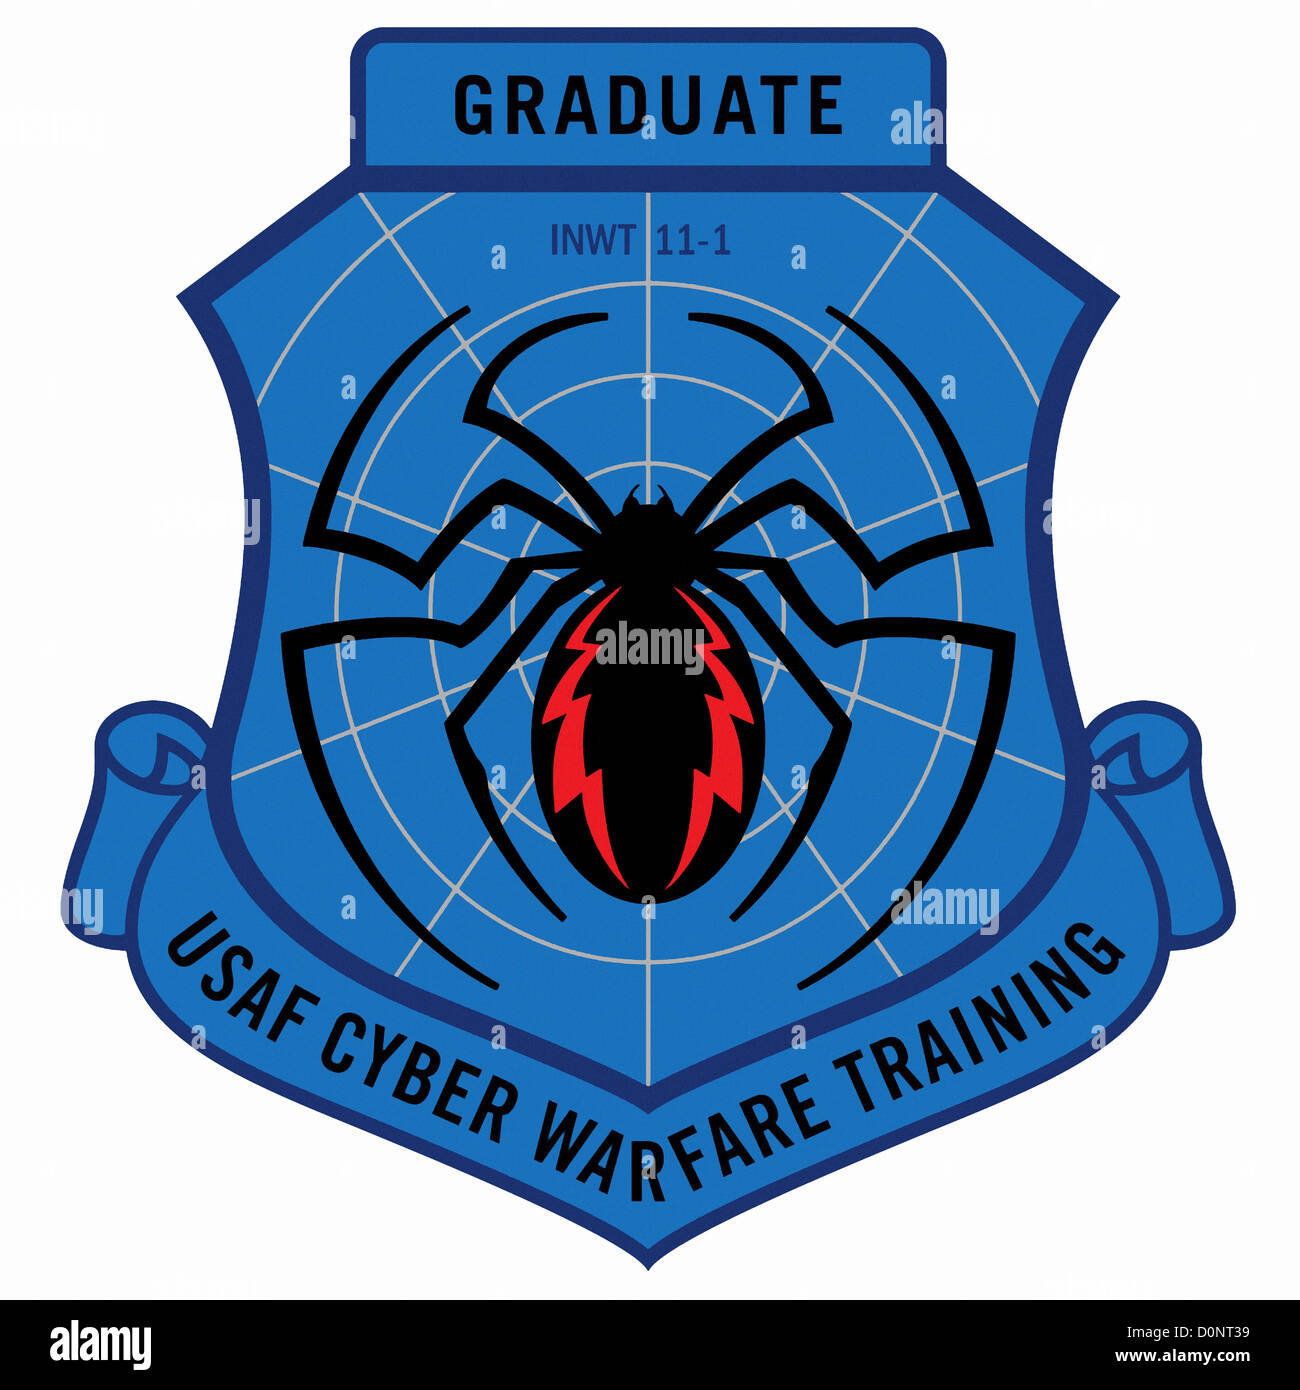 The service patch for a graduate of the U.S. Air Force's Cyber Warfare Training, which consists of a spider in a web. Stock Photo